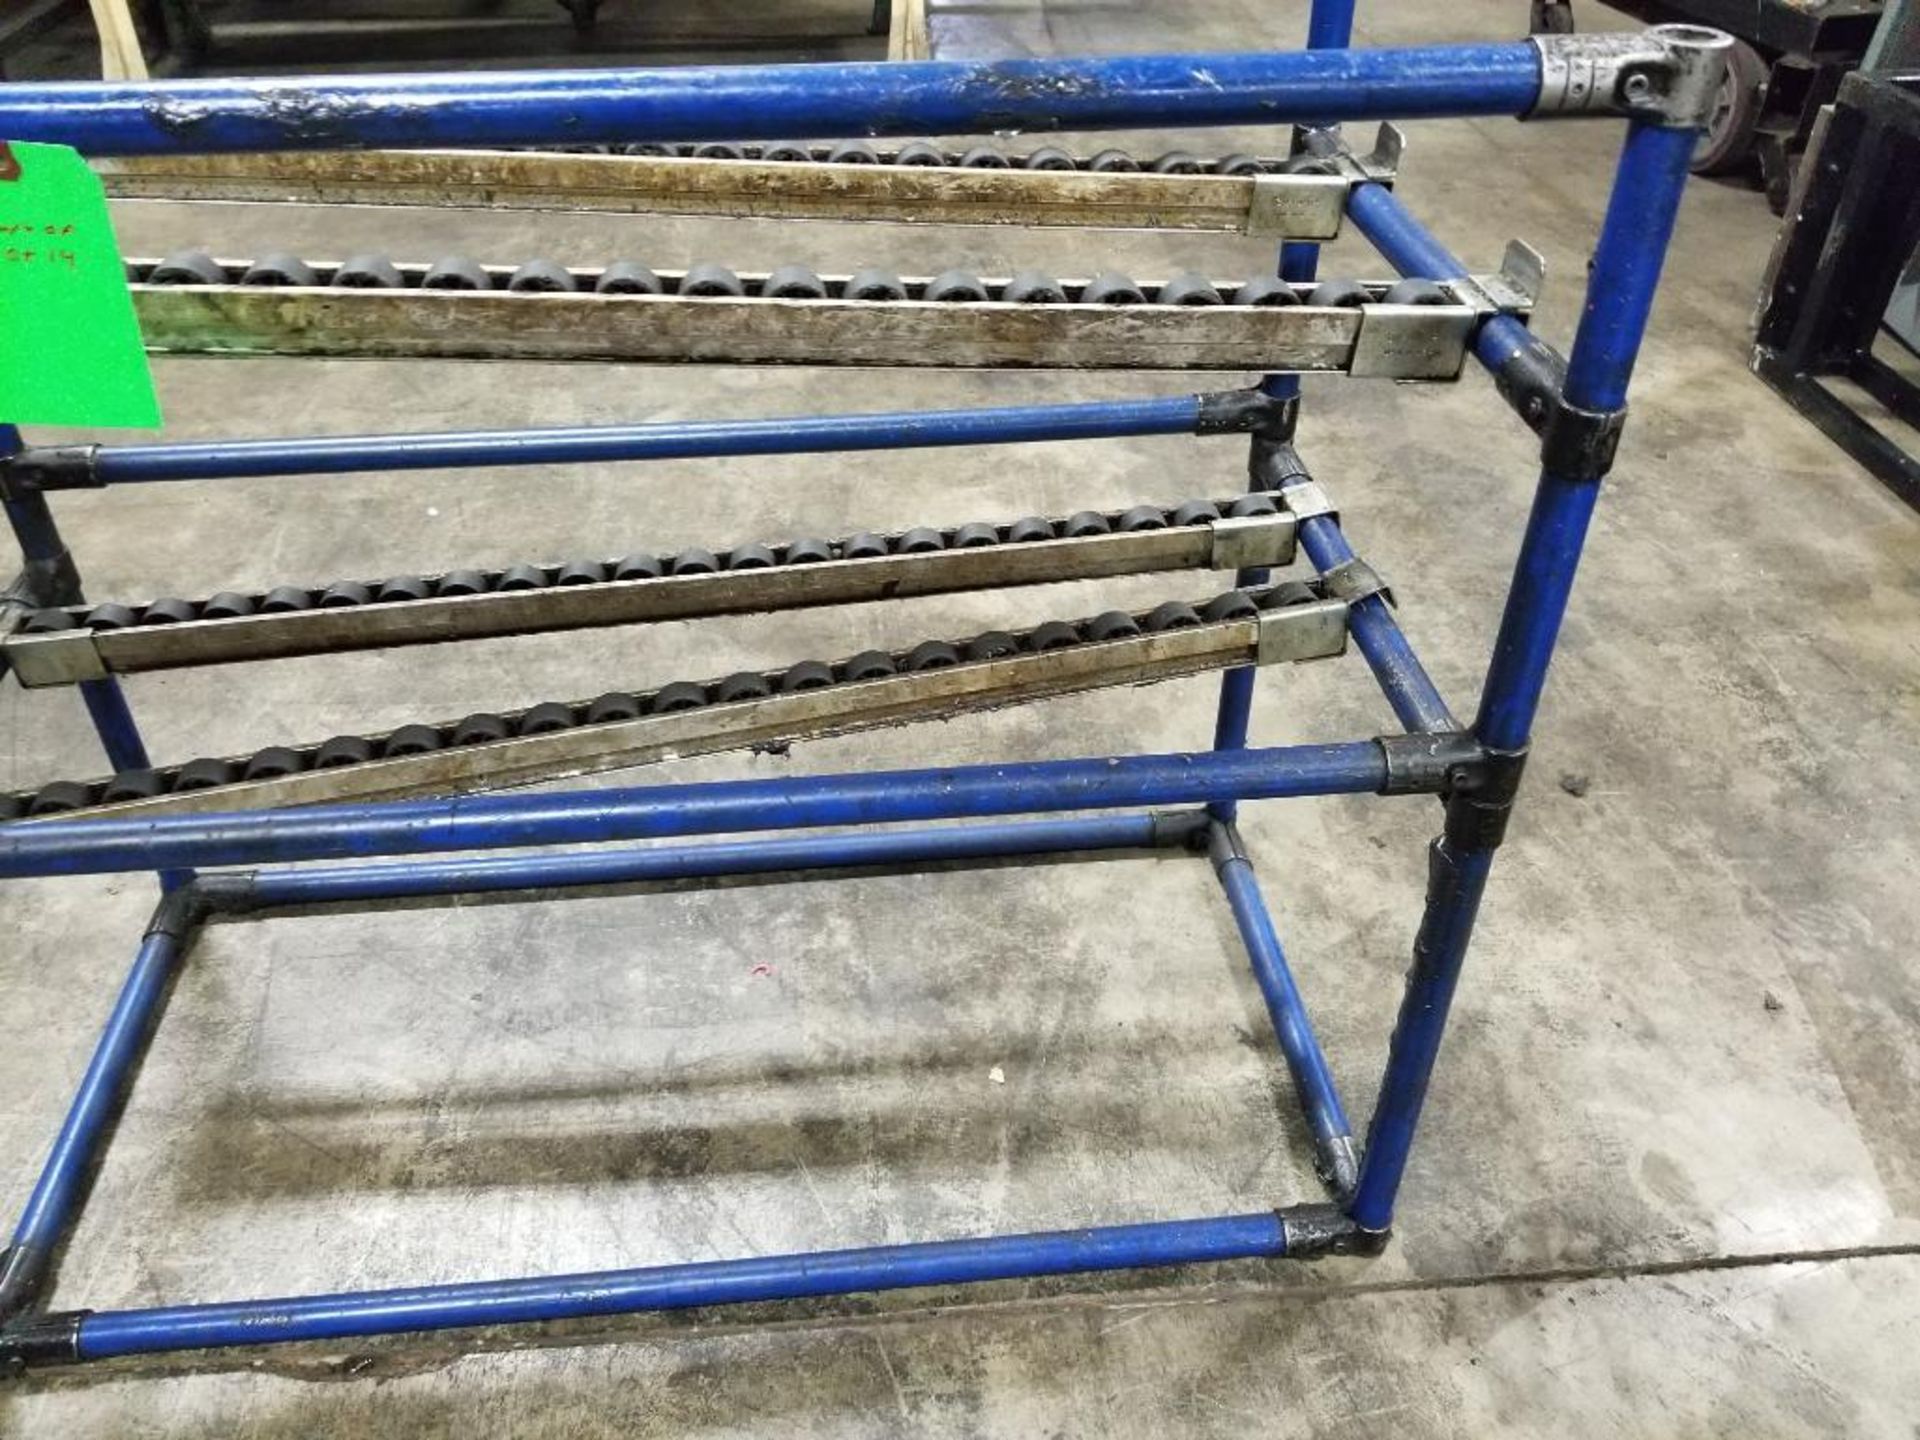 Qty 2 - Two-level roller racks. 39x19x33 each. LxWxH. - Image 9 of 11